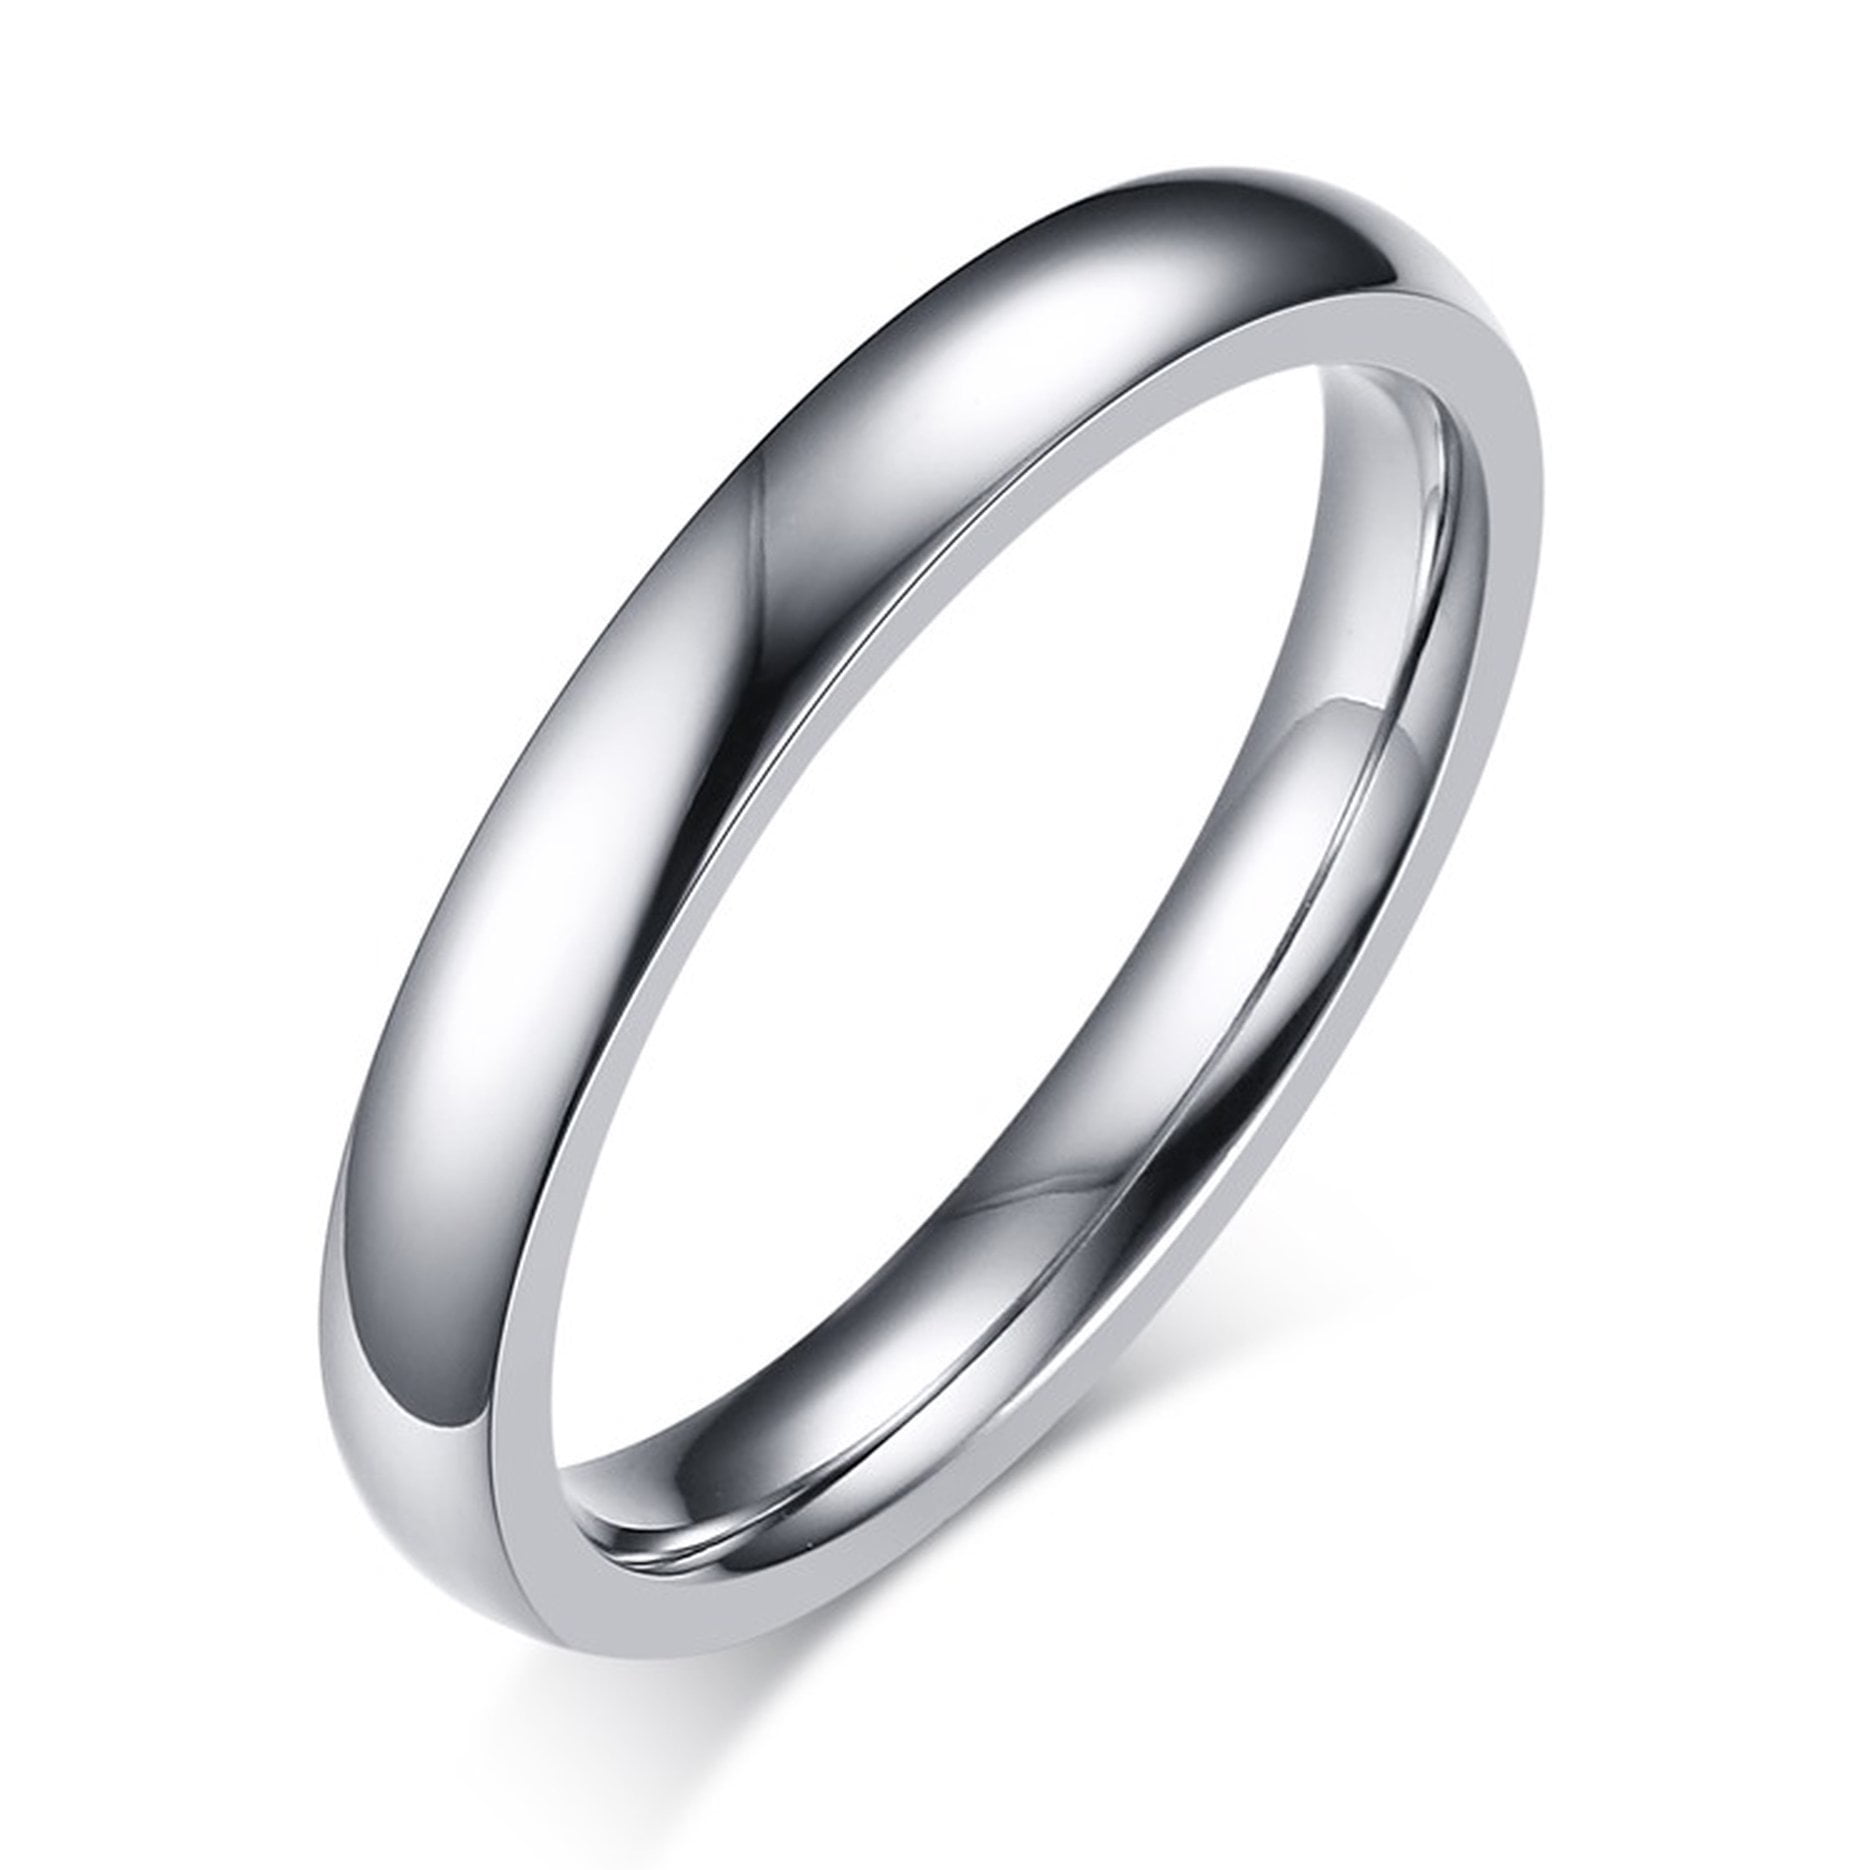 3mm Stainless Steel Plain Wedding Band Ring for Women Men Size M-Y